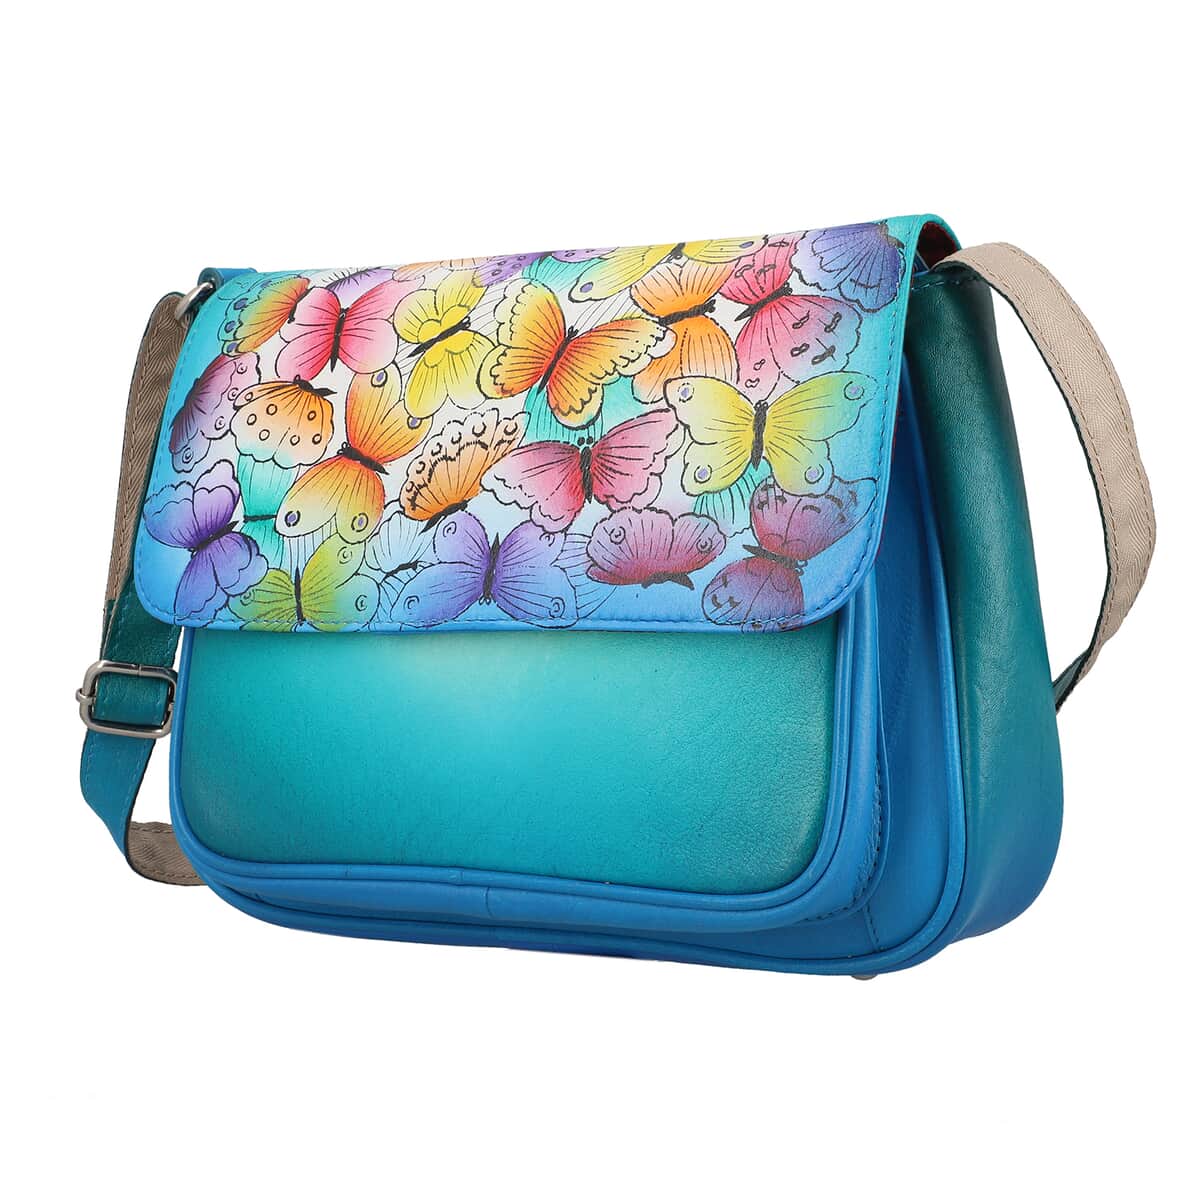 "SUKRITI 100% Genuine Leather Crossbody Bag Theme: Butterfly Color: Blue Size: 10 x 3 x 7 inches" image number 2